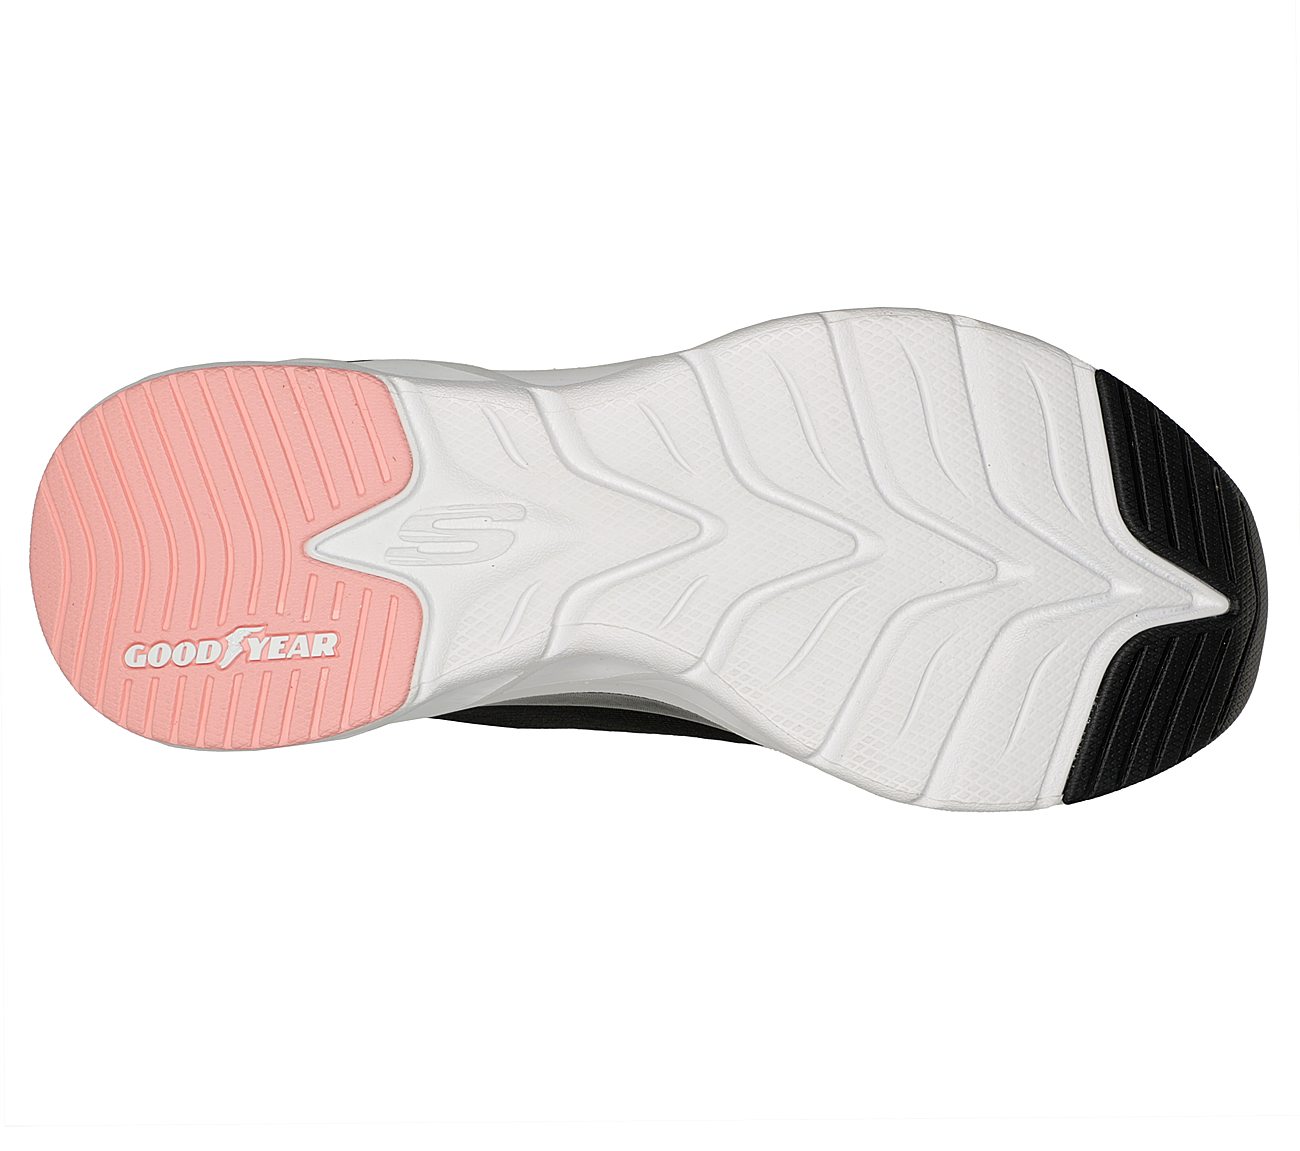 ARCH FIT GLIDE-STEP-TOP GLORY, BLACK/PINK Footwear Bottom View